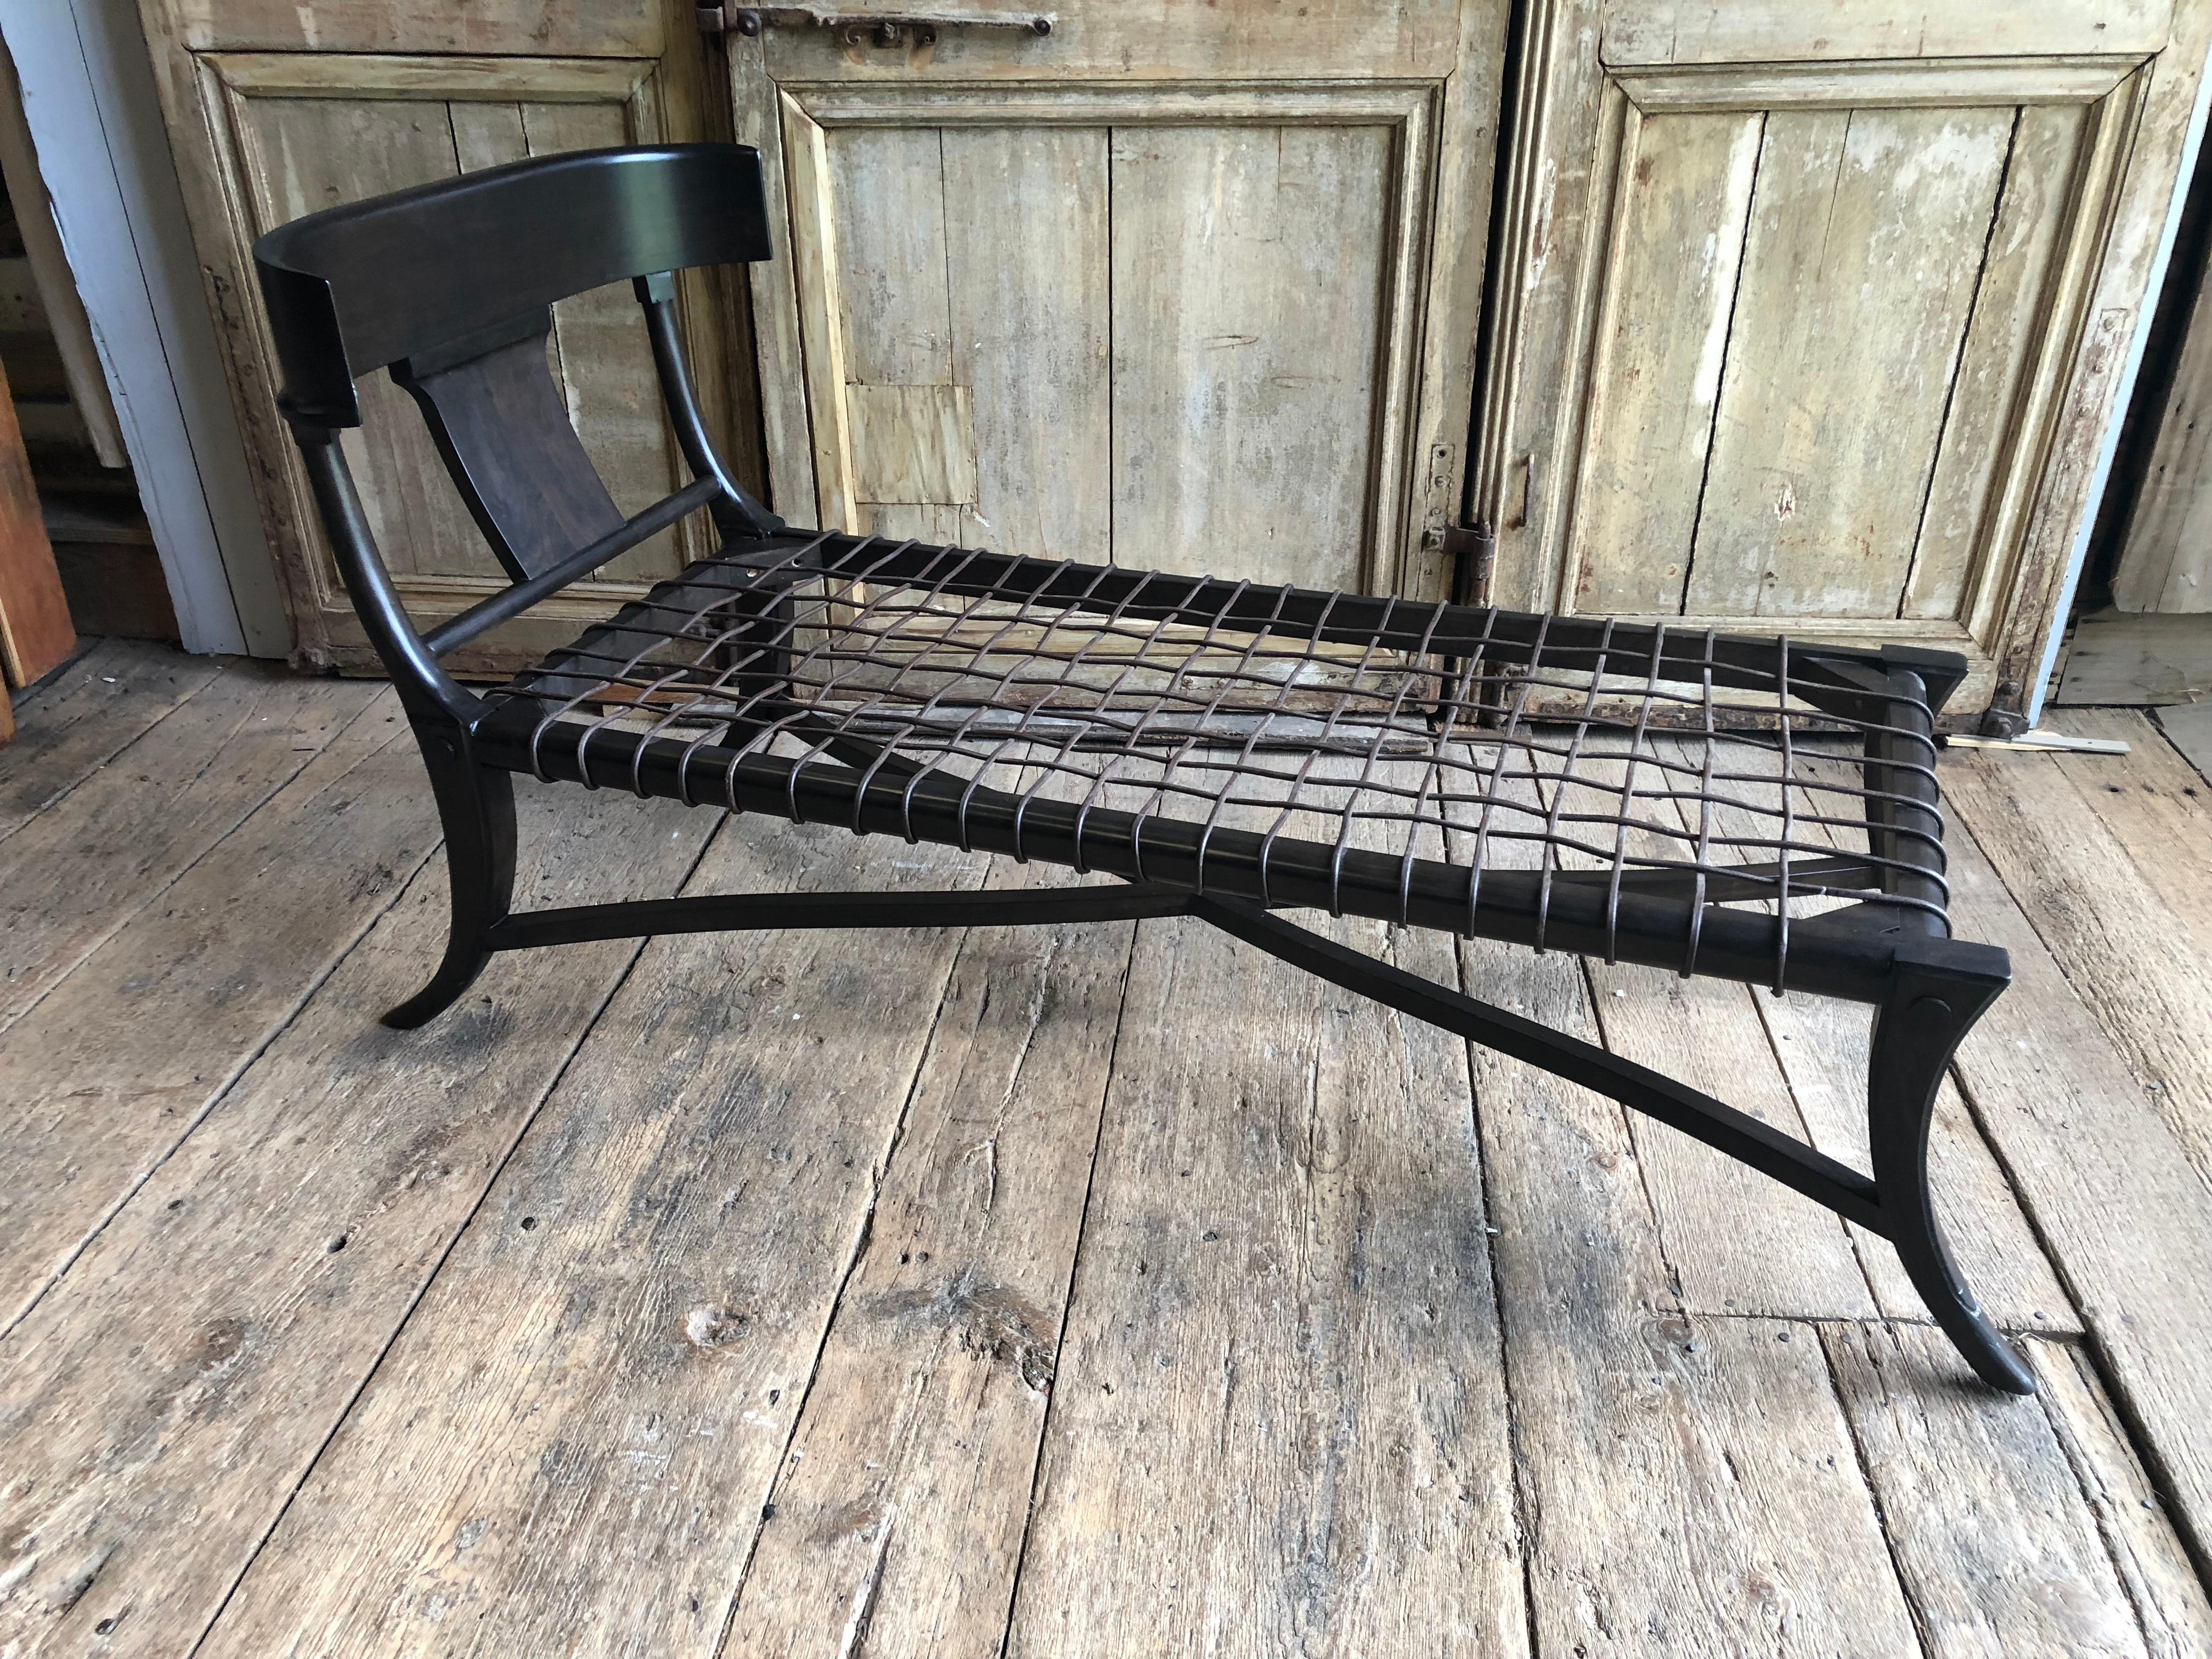 An ebonized “klismos” form lounge chair designed by H. J. Robsjohn Gibbings, contemporary. Lacking cushion. Recommended cushion size 58” x 26”. Contemporary.